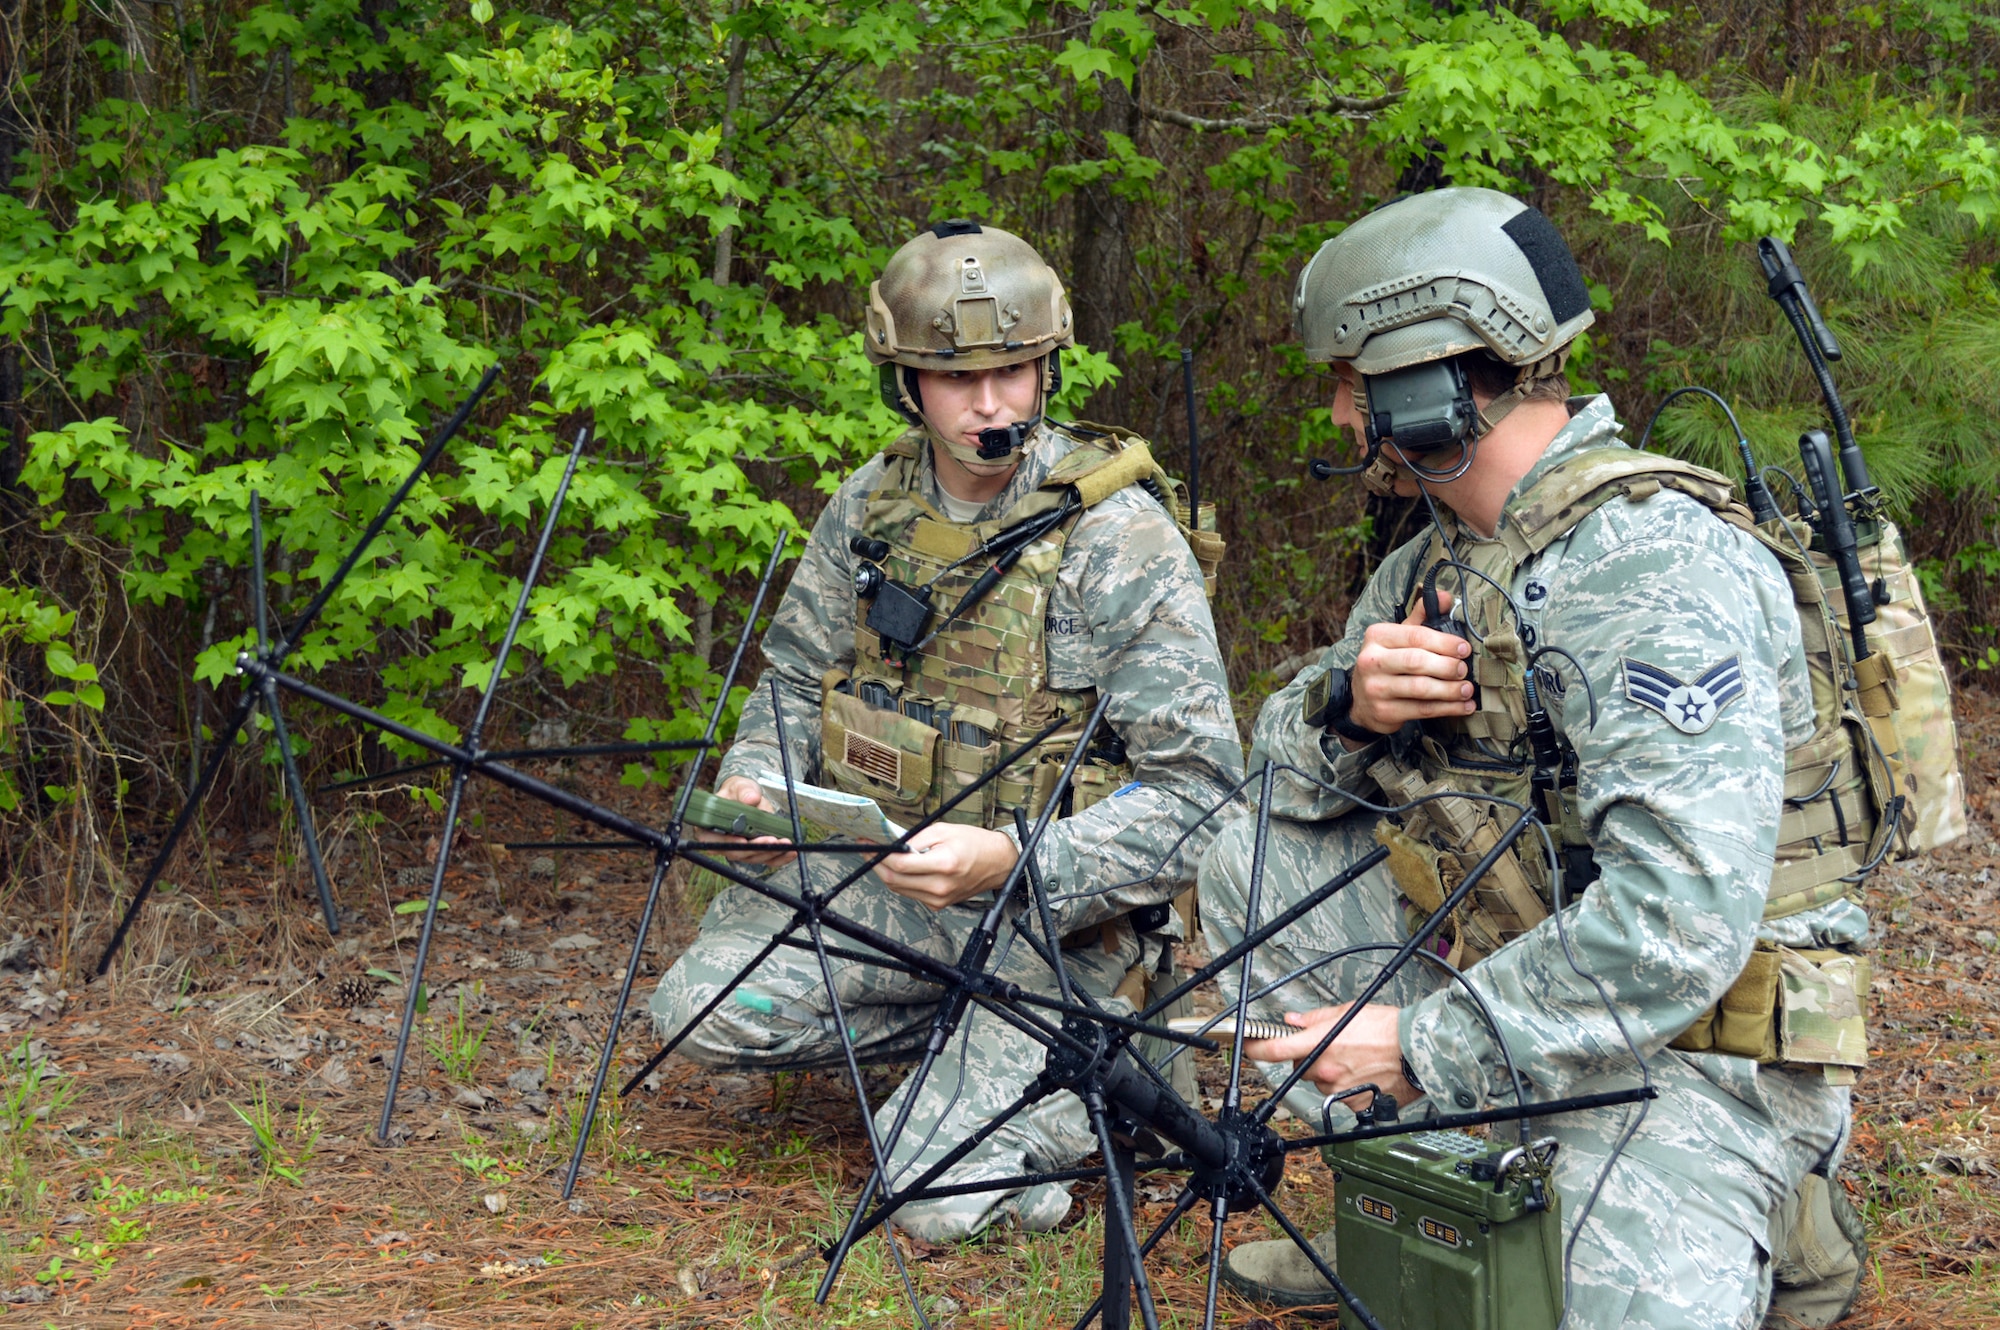 Air Force 2nd Lt. TJ Bertsch, an air liaison officer, left, and Senior Airman Luke Molidor, a joint terminal attack controller, both from the 14th Air Support Operations Squadron, Pope Army Airfield, N.C., direct close air support operations with the Air Support Operations Center using a satellite communications antenna. The ASOC is the primary command and control agency for integrating joint air power with Army operations. Fighter duty technicians coordinate air support for the JTACs and provide airspace de-confliction for tasked aircraft. Once JTACs receive a handoff of aircraft from the ASOC, it's their job to direct the fighters to the correct targets within close proximity to ground forces using radios and communications equipment. (U.S. Air Force photo/Marvin Krause)